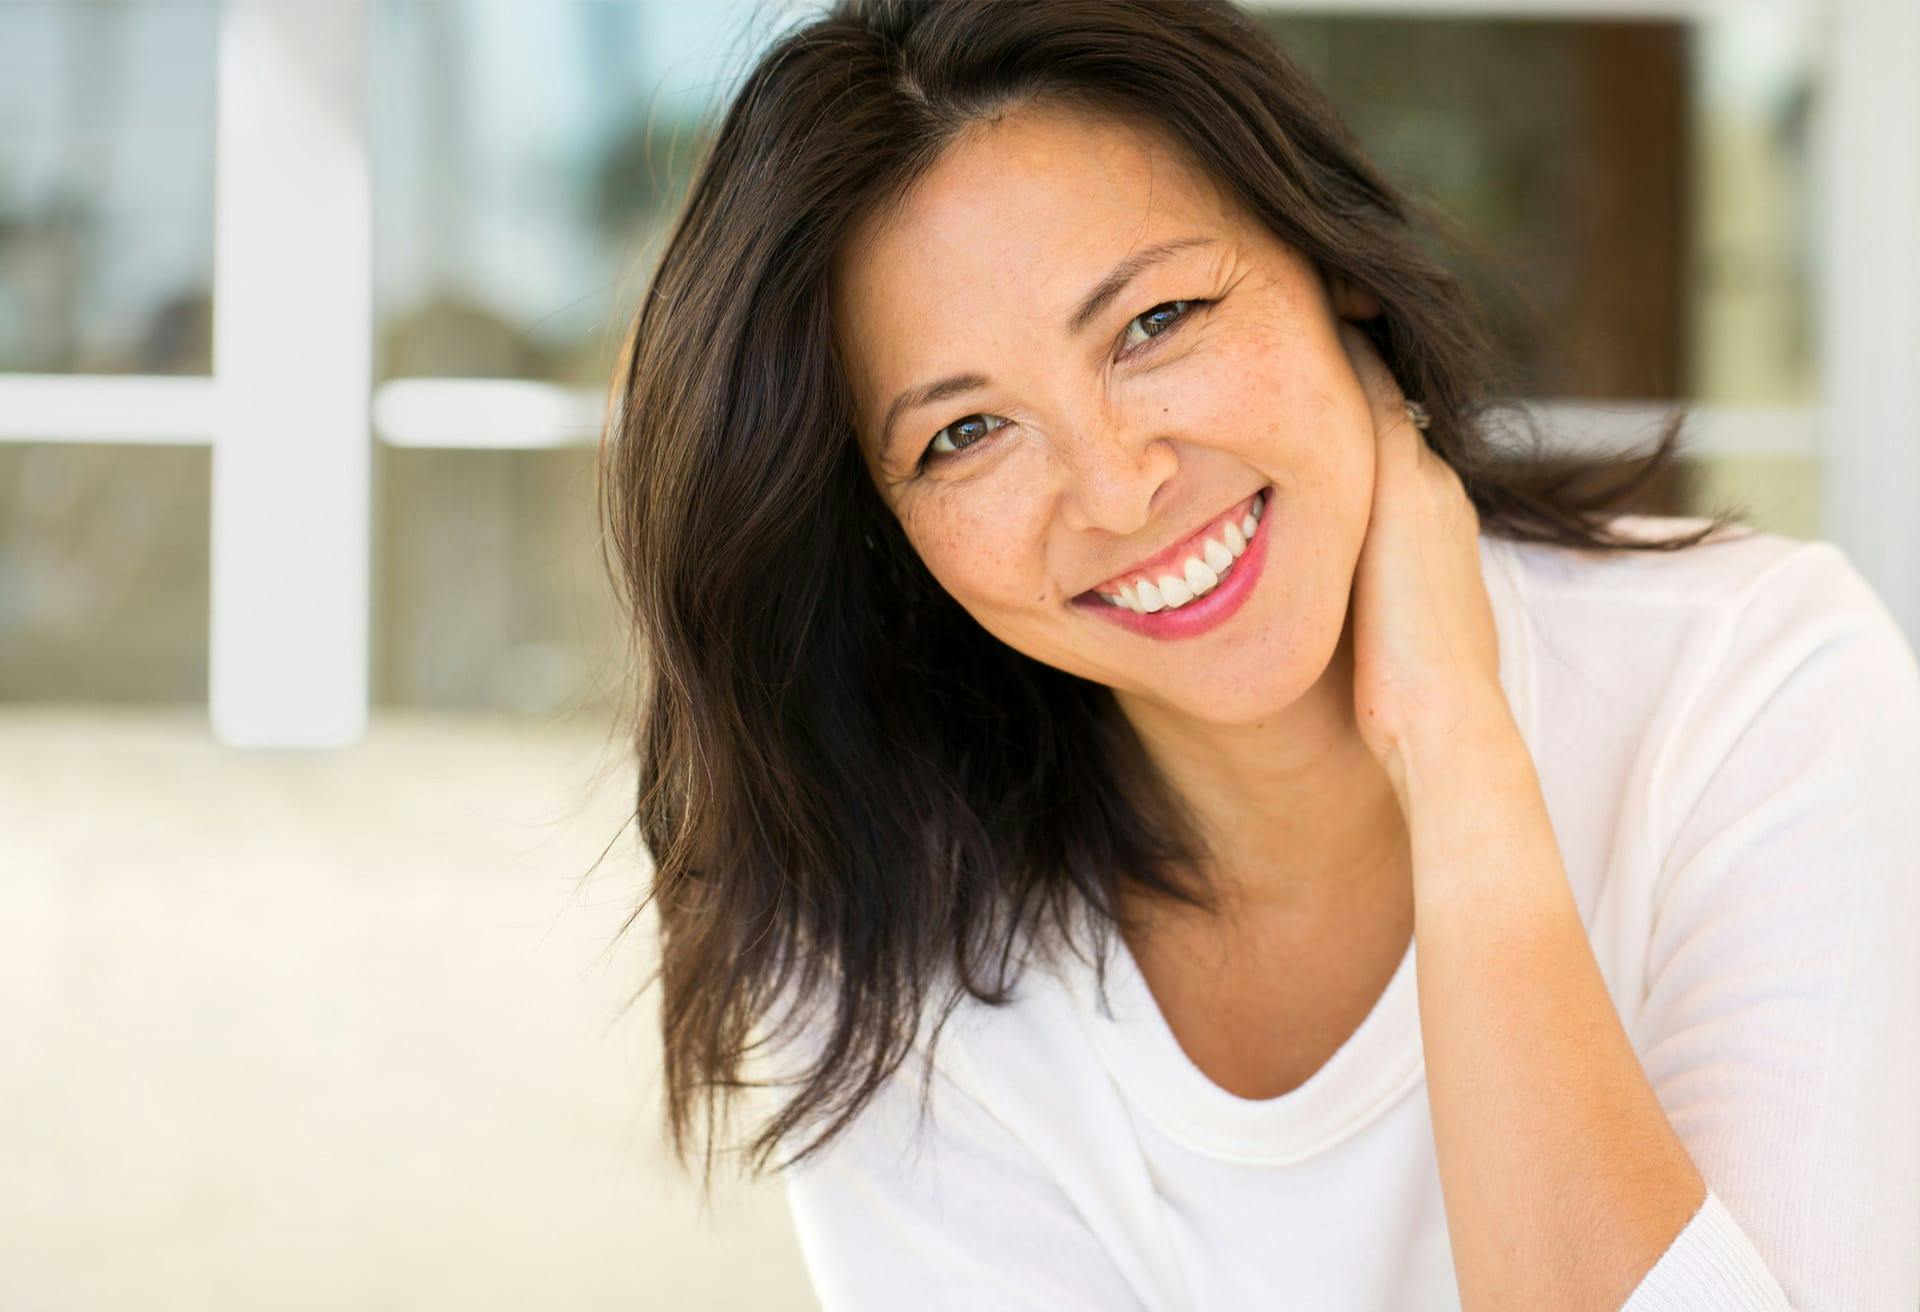 Smiling woman wearing white shirt with hand on back of neck.